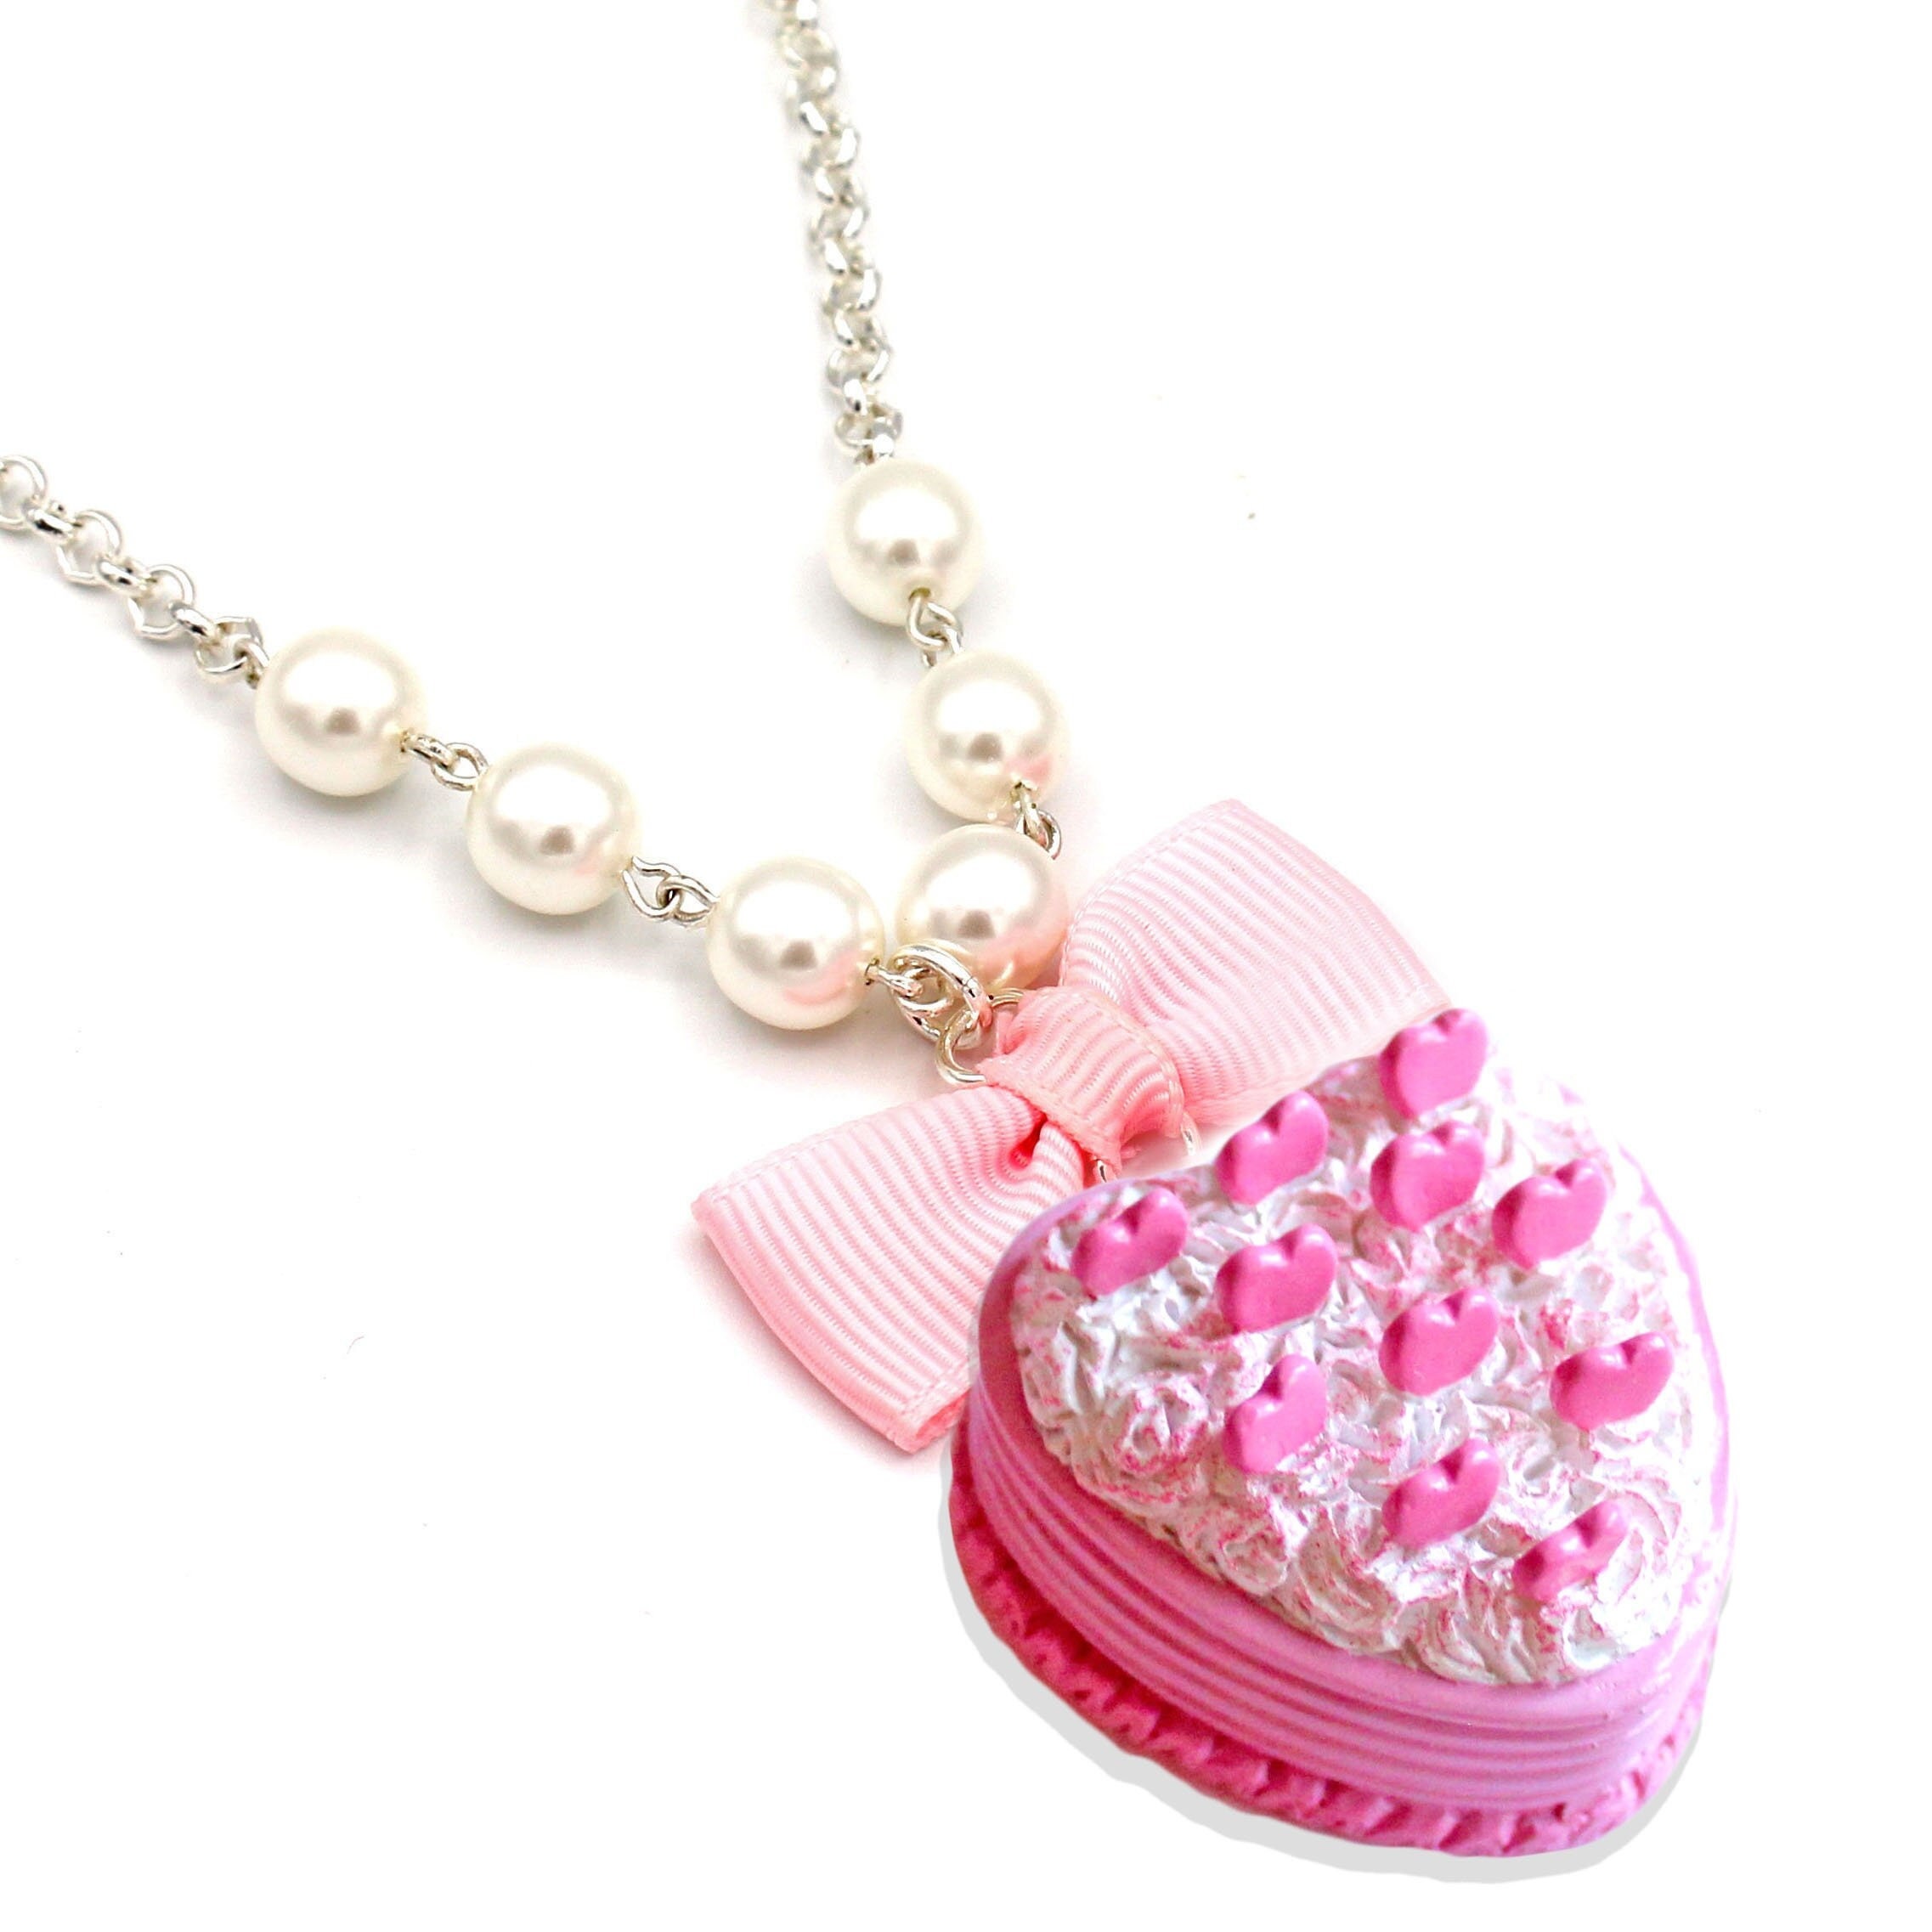 Custom Name Necklace, Personalized Candy Necklace, Pastel Candy